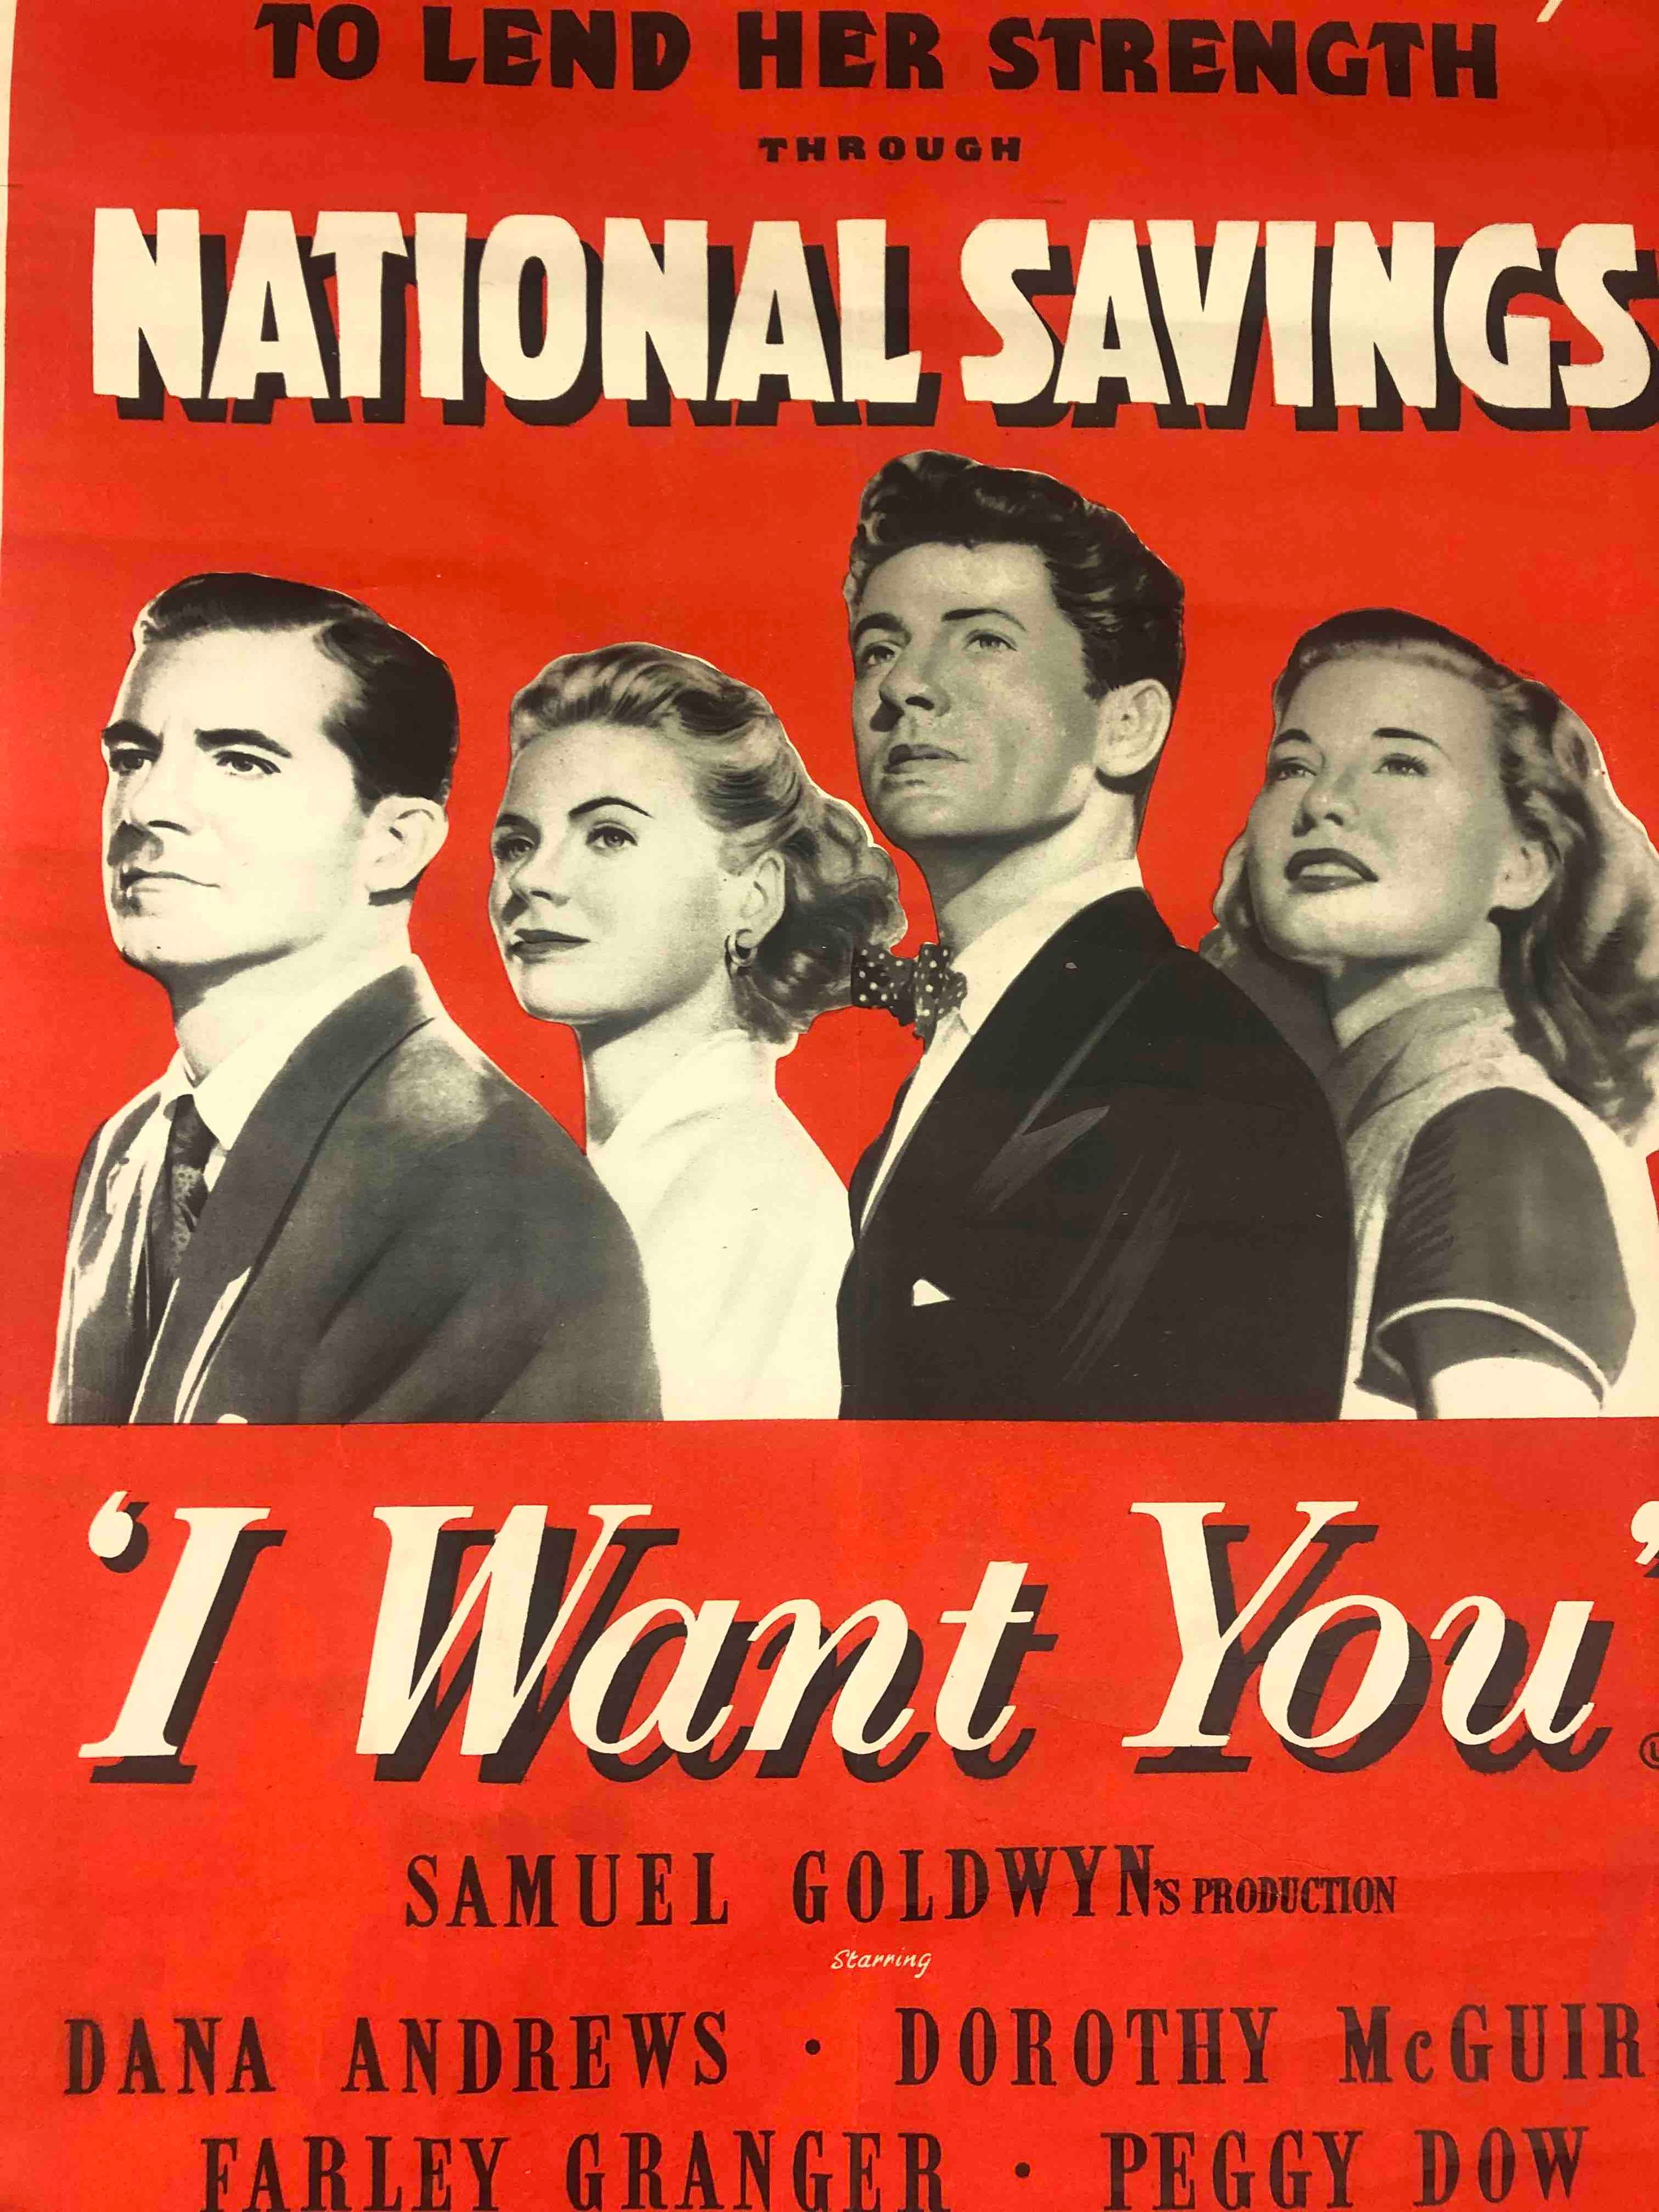 A group of six vintage film posters including Danny Kaye, together with National Savings advertising - Image 8 of 12